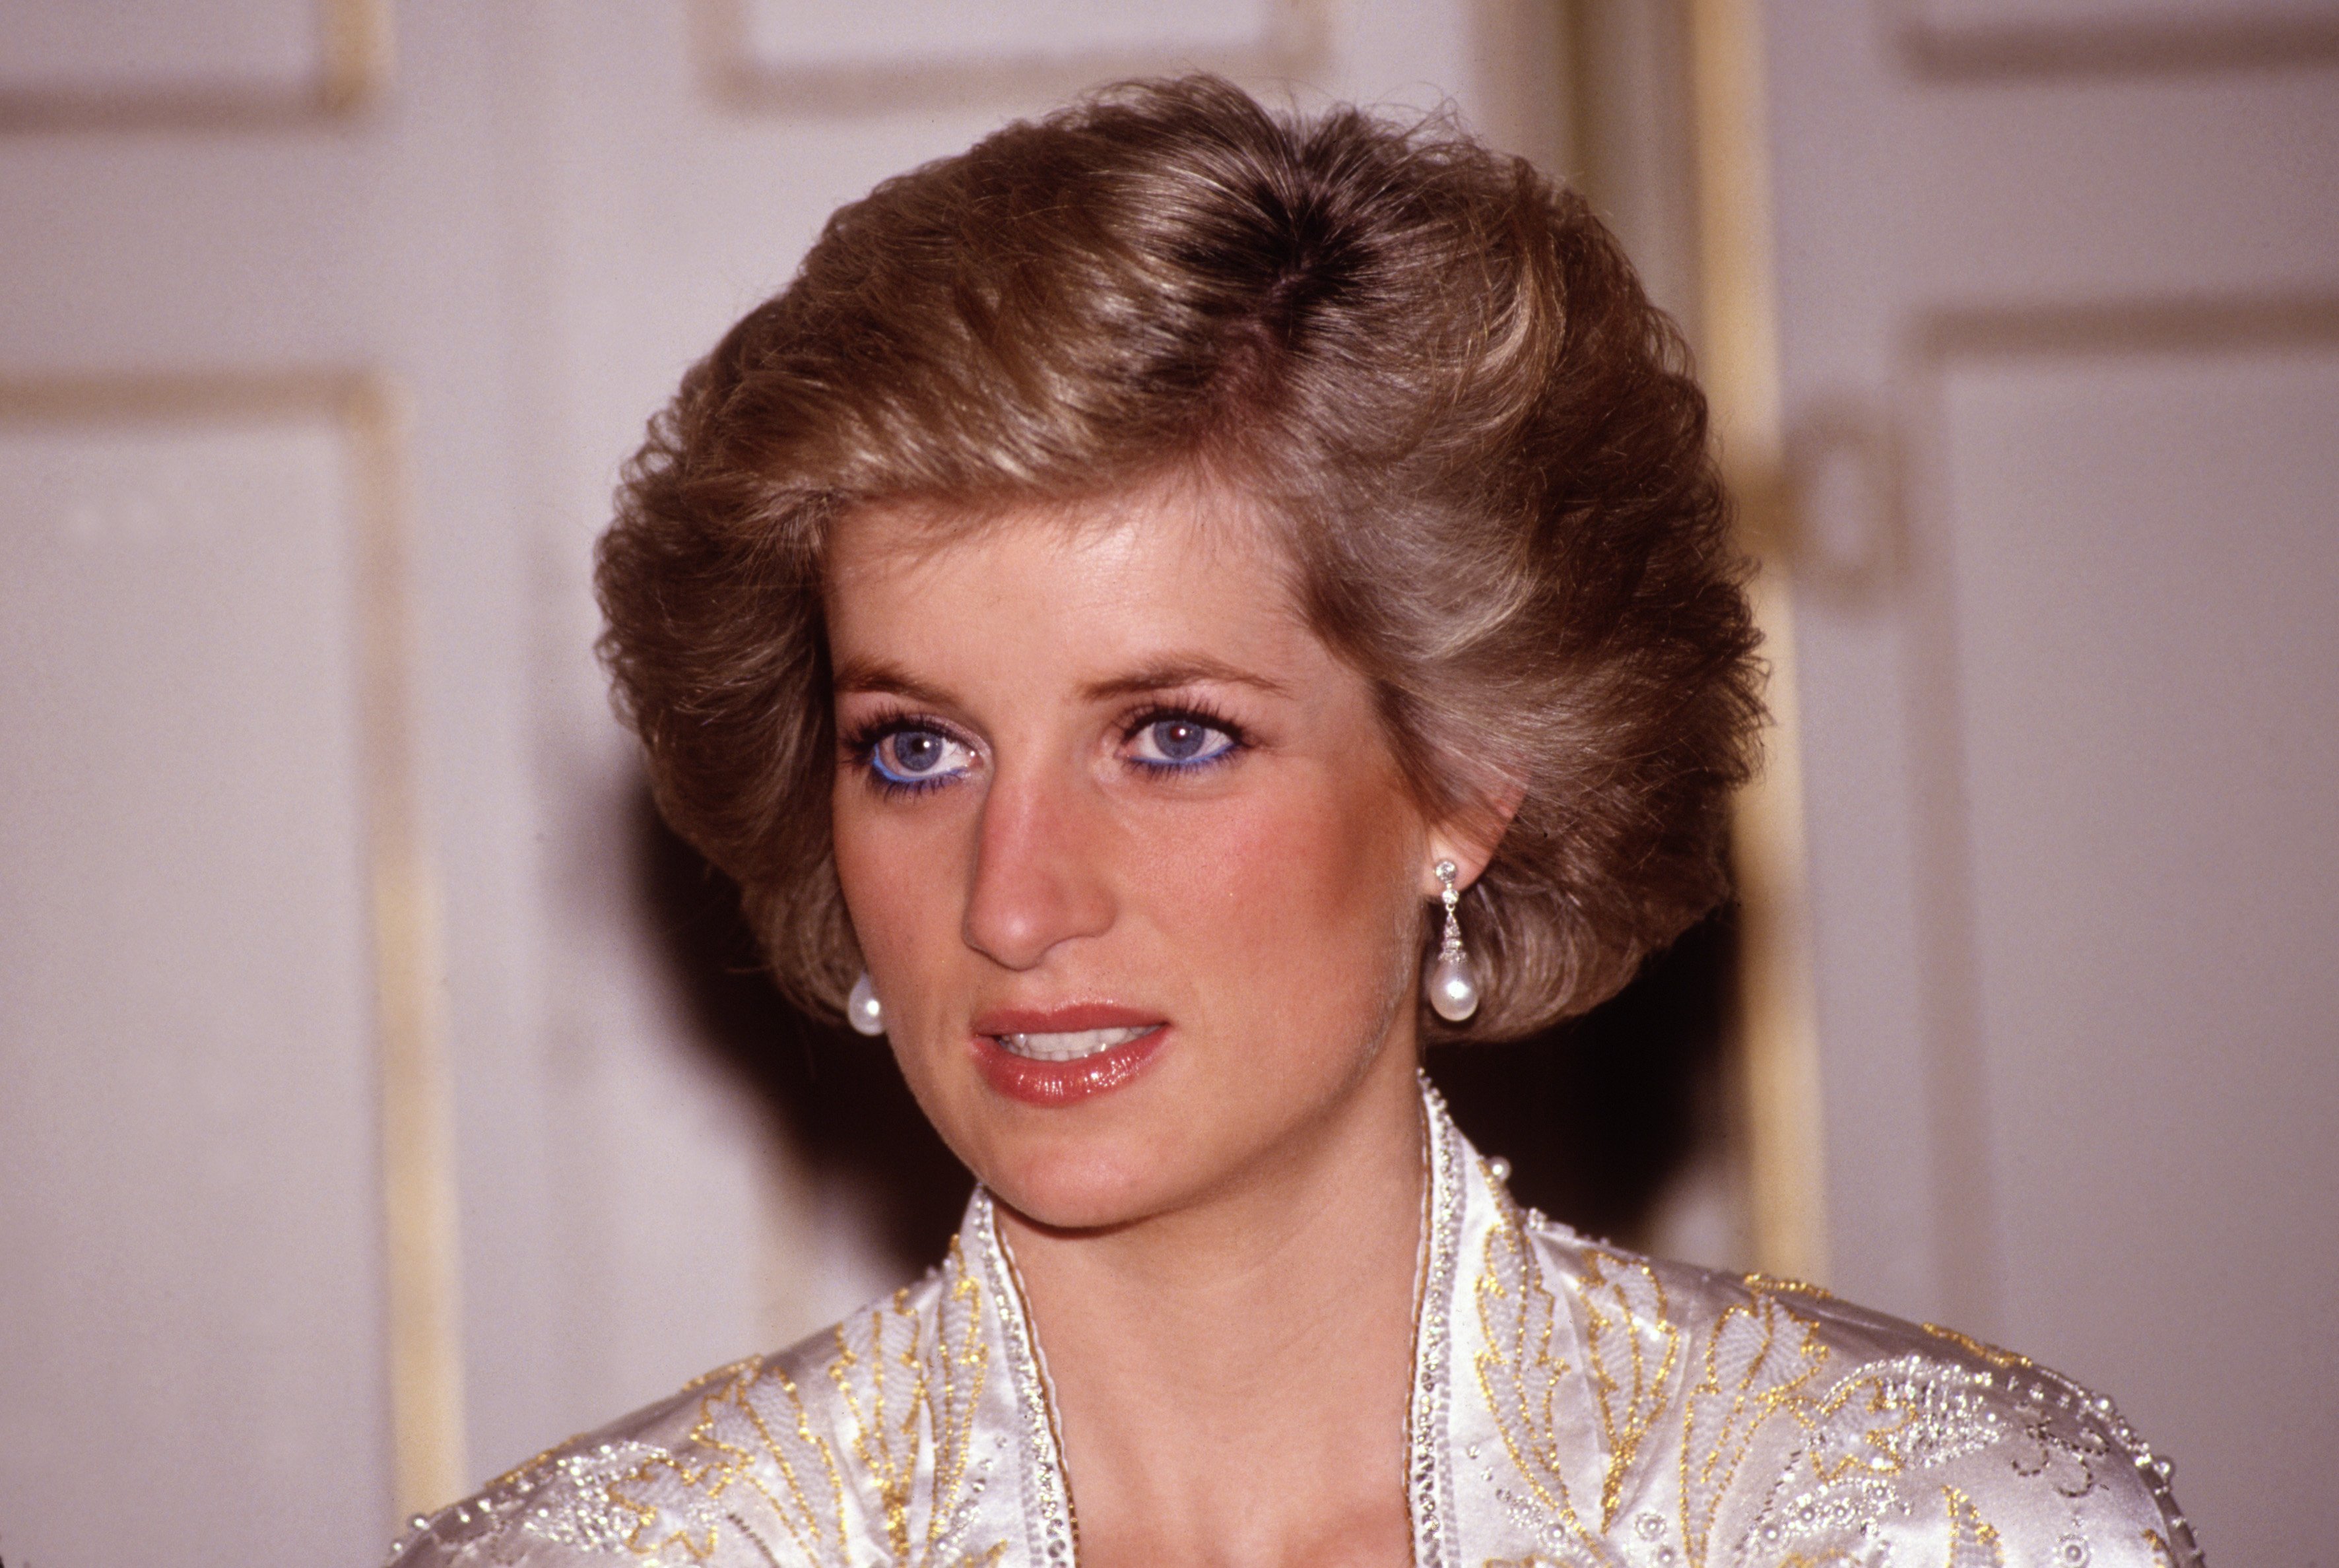 Diana Princess of Wales at a dinner given by President Mitterand in November, 1988 at the Elysee Palace in Paris, France during the Royal Tour of France.Diana wore a dress designed by Victor Edelstein. | Source: Getty Images